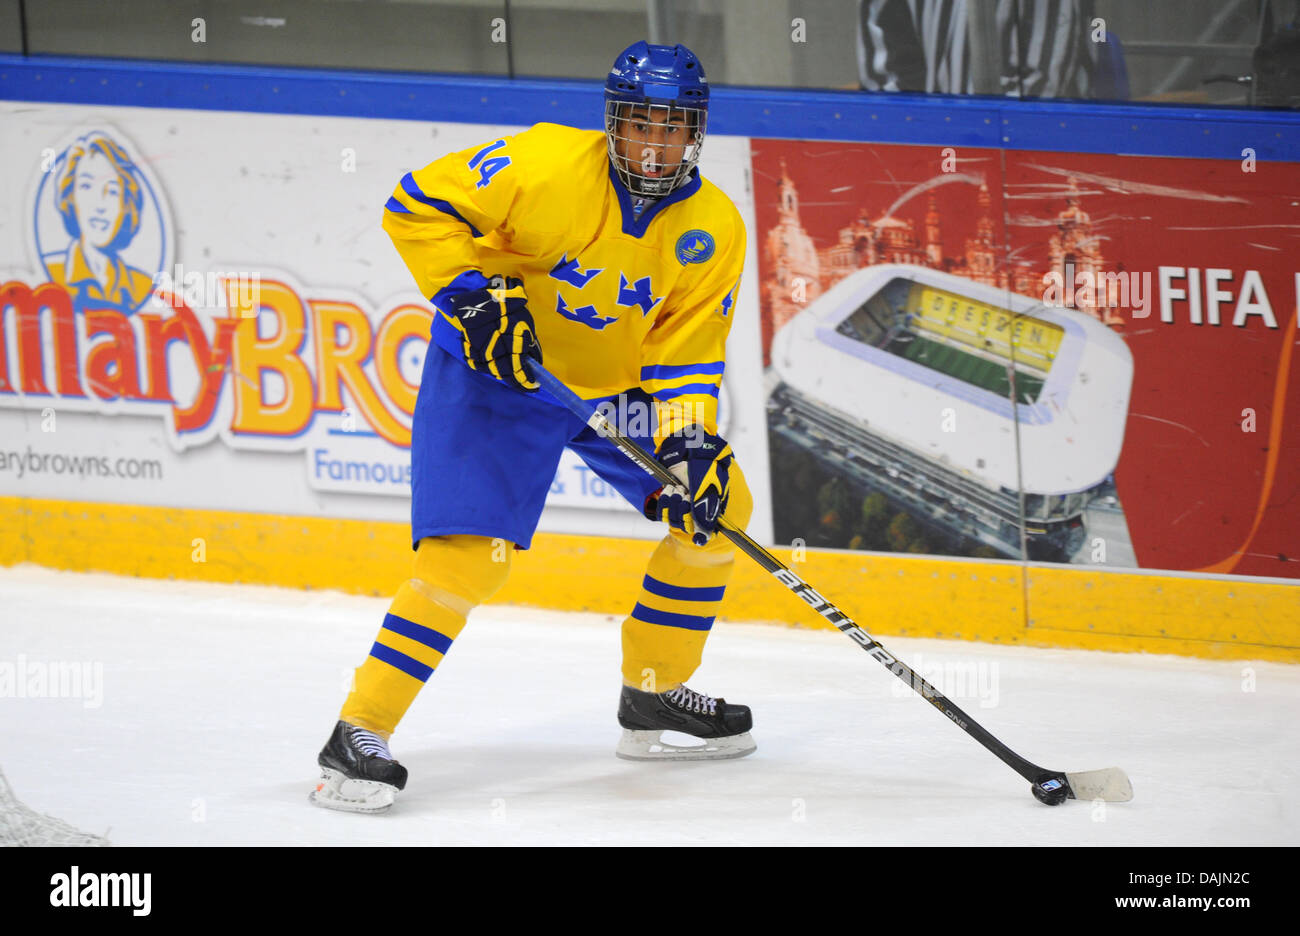 Sweden's Jeremy Boyce-Rotevall is pictured during the IIHF U18 World Ice Hockey Championships in Dresden, Germany, 19 April 2011. Photo: Thomas Eisenhuth Stock Photo